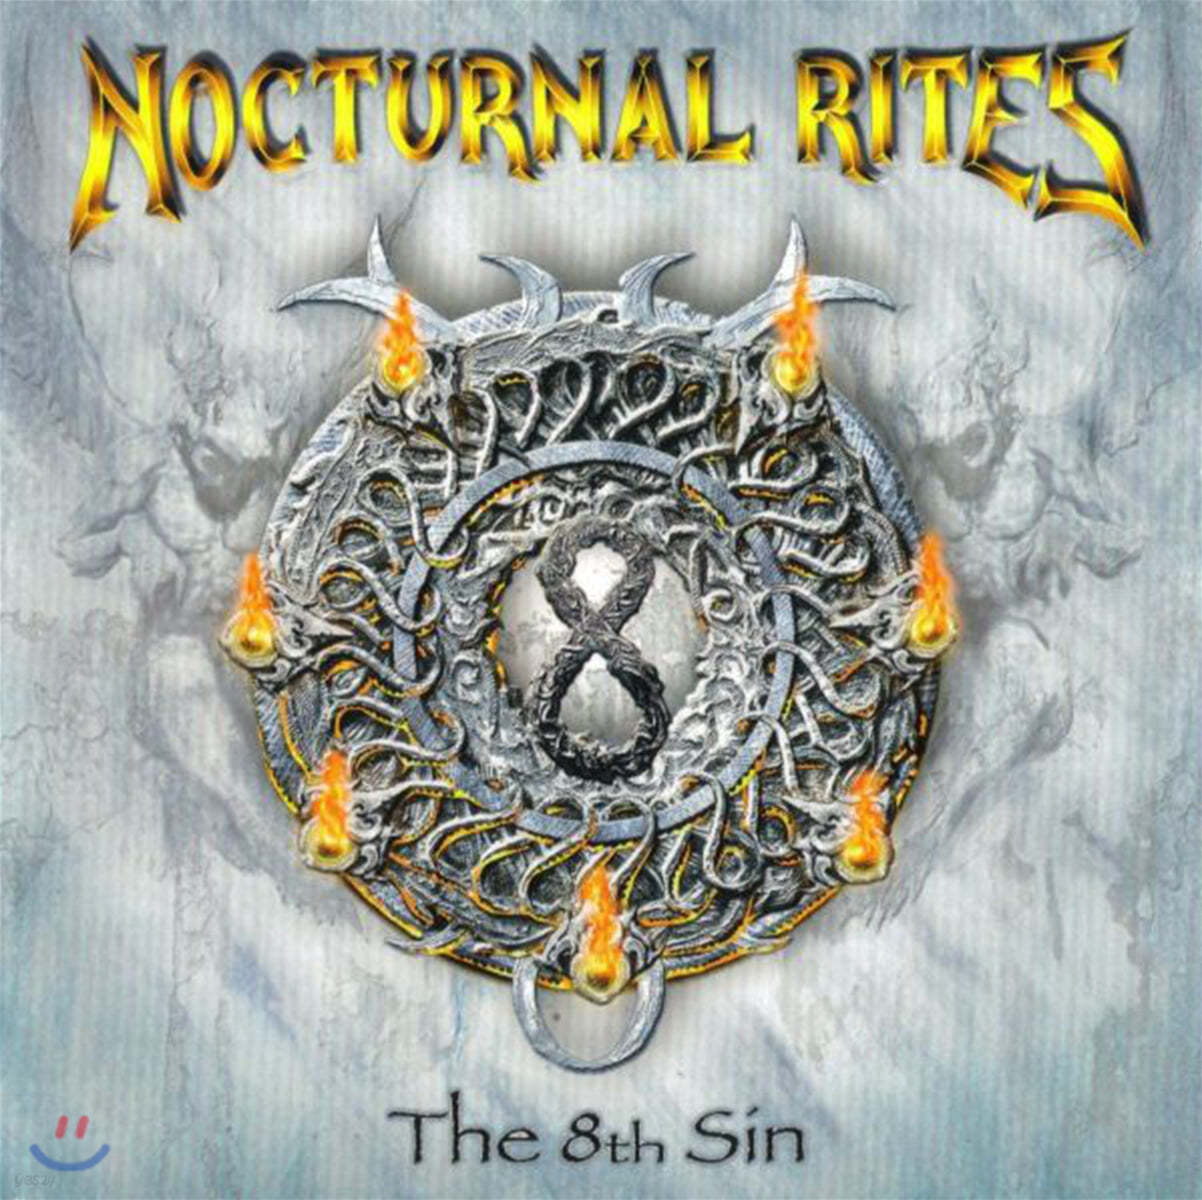 Nocturnal Rites (녹터널 라이츠) - The 8th Sin